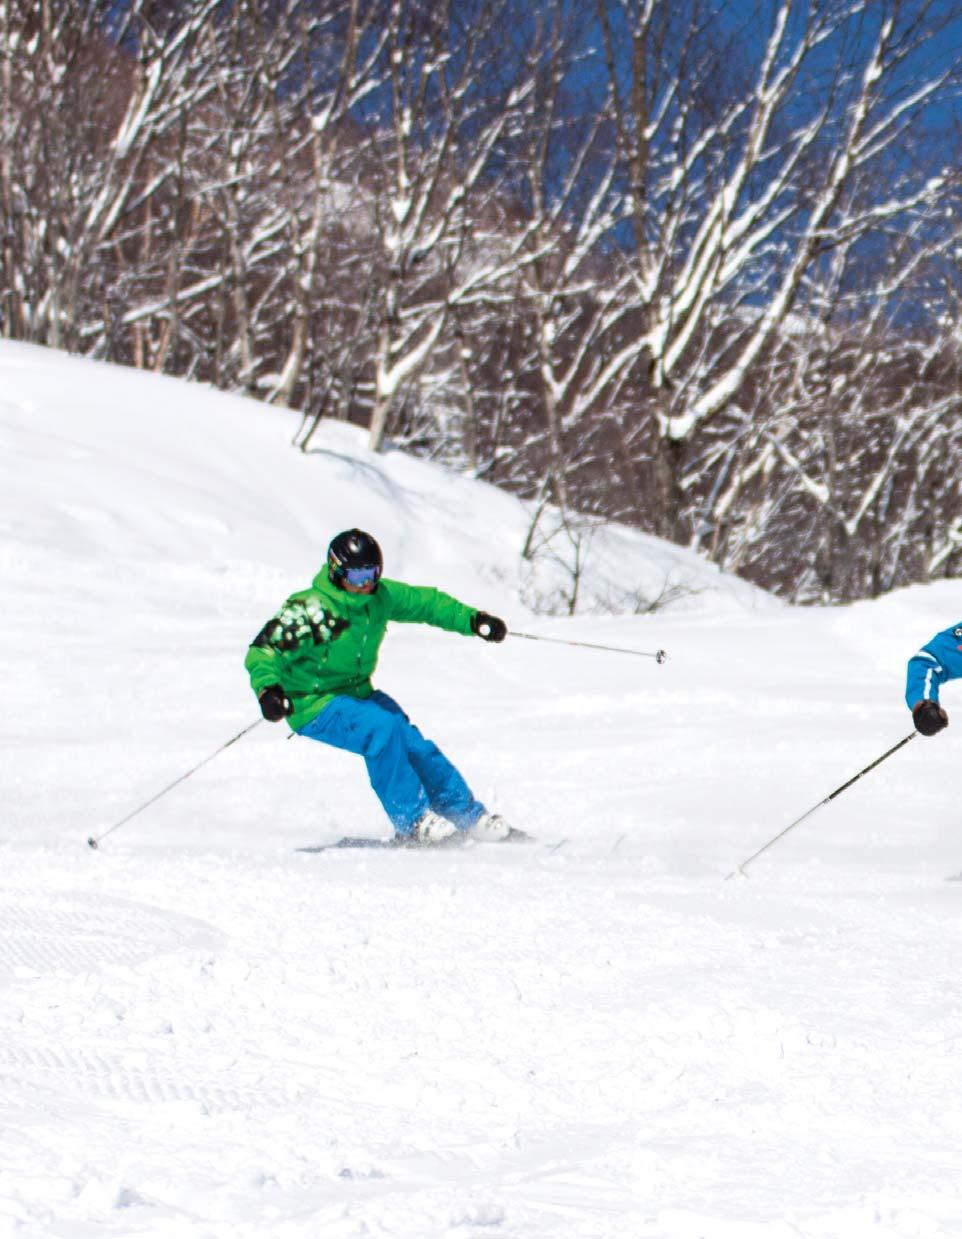 Beginner Skiers will have you cruising down the easy runs in no time.